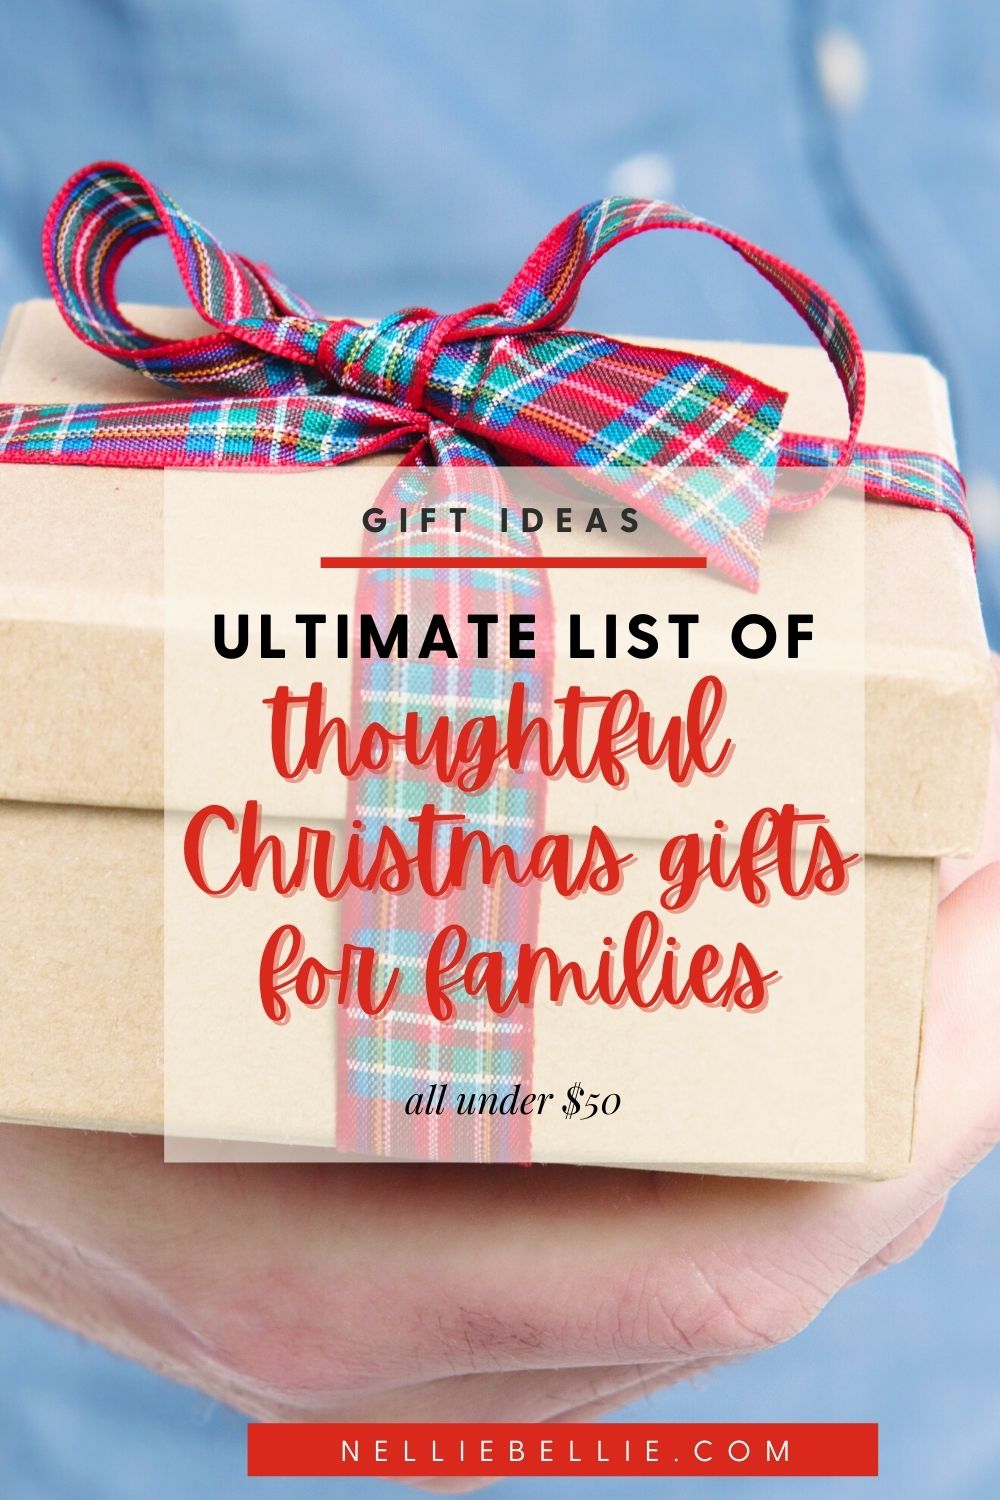 25+ Christmas Gift Ideas for family & friends (under $50) ⋆ NellieBellie